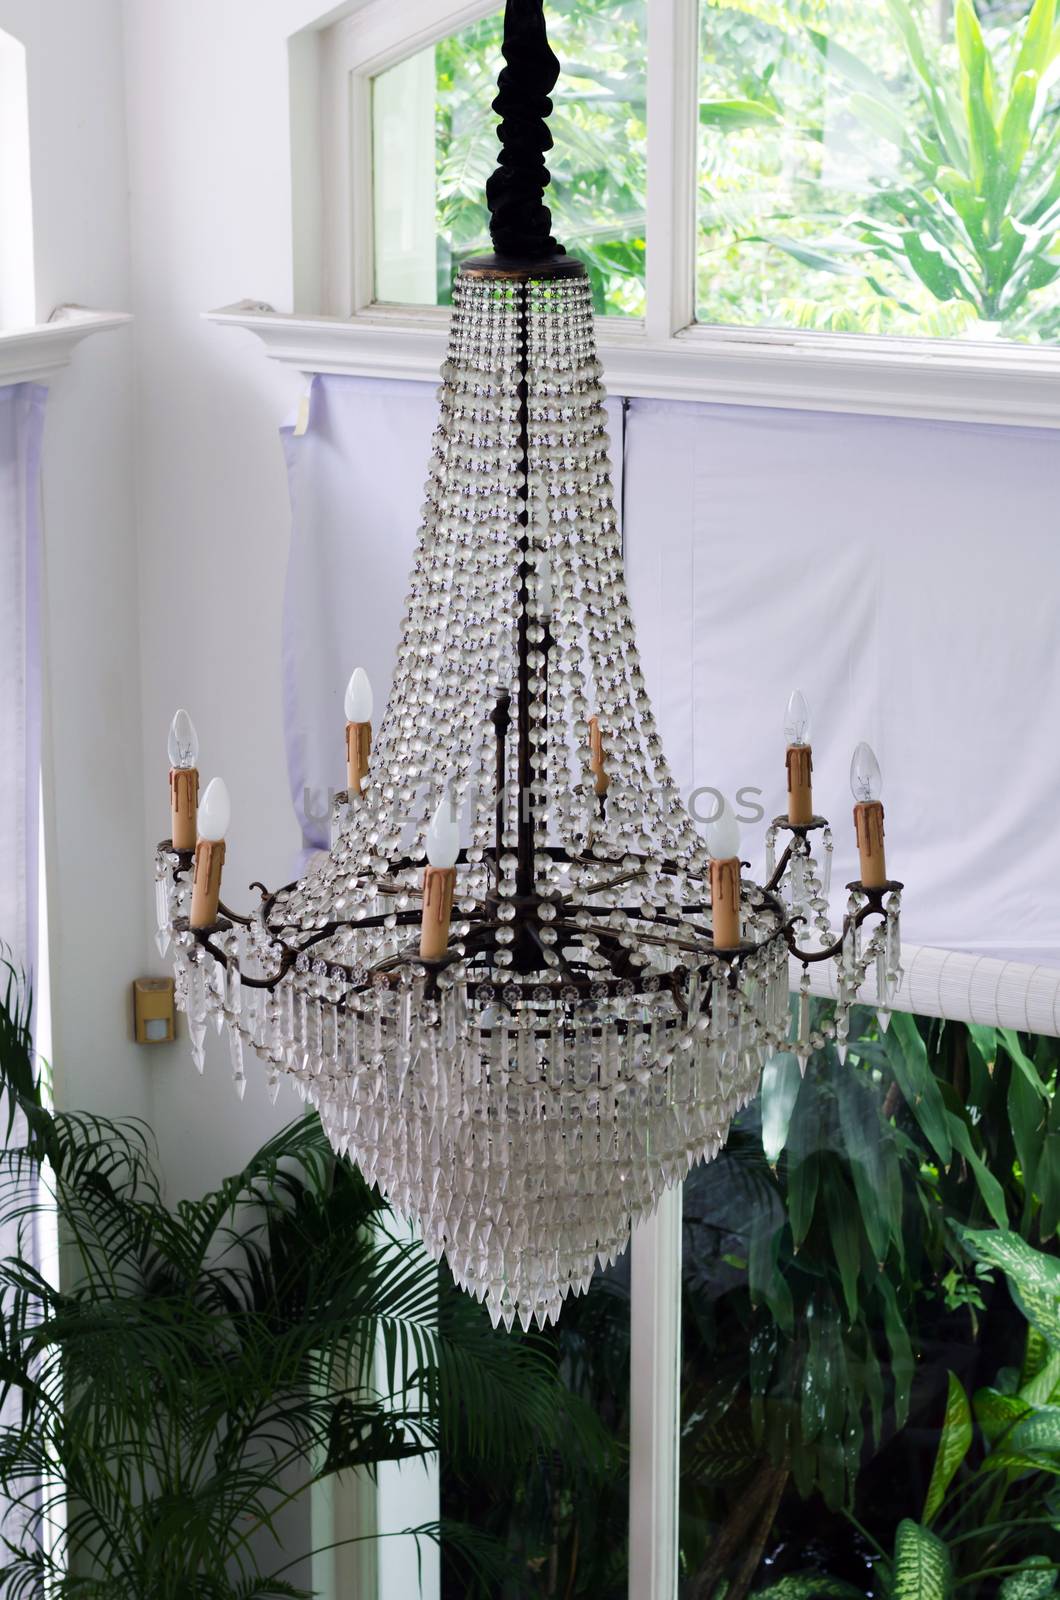 Chandelier in classic room  by siraanamwong